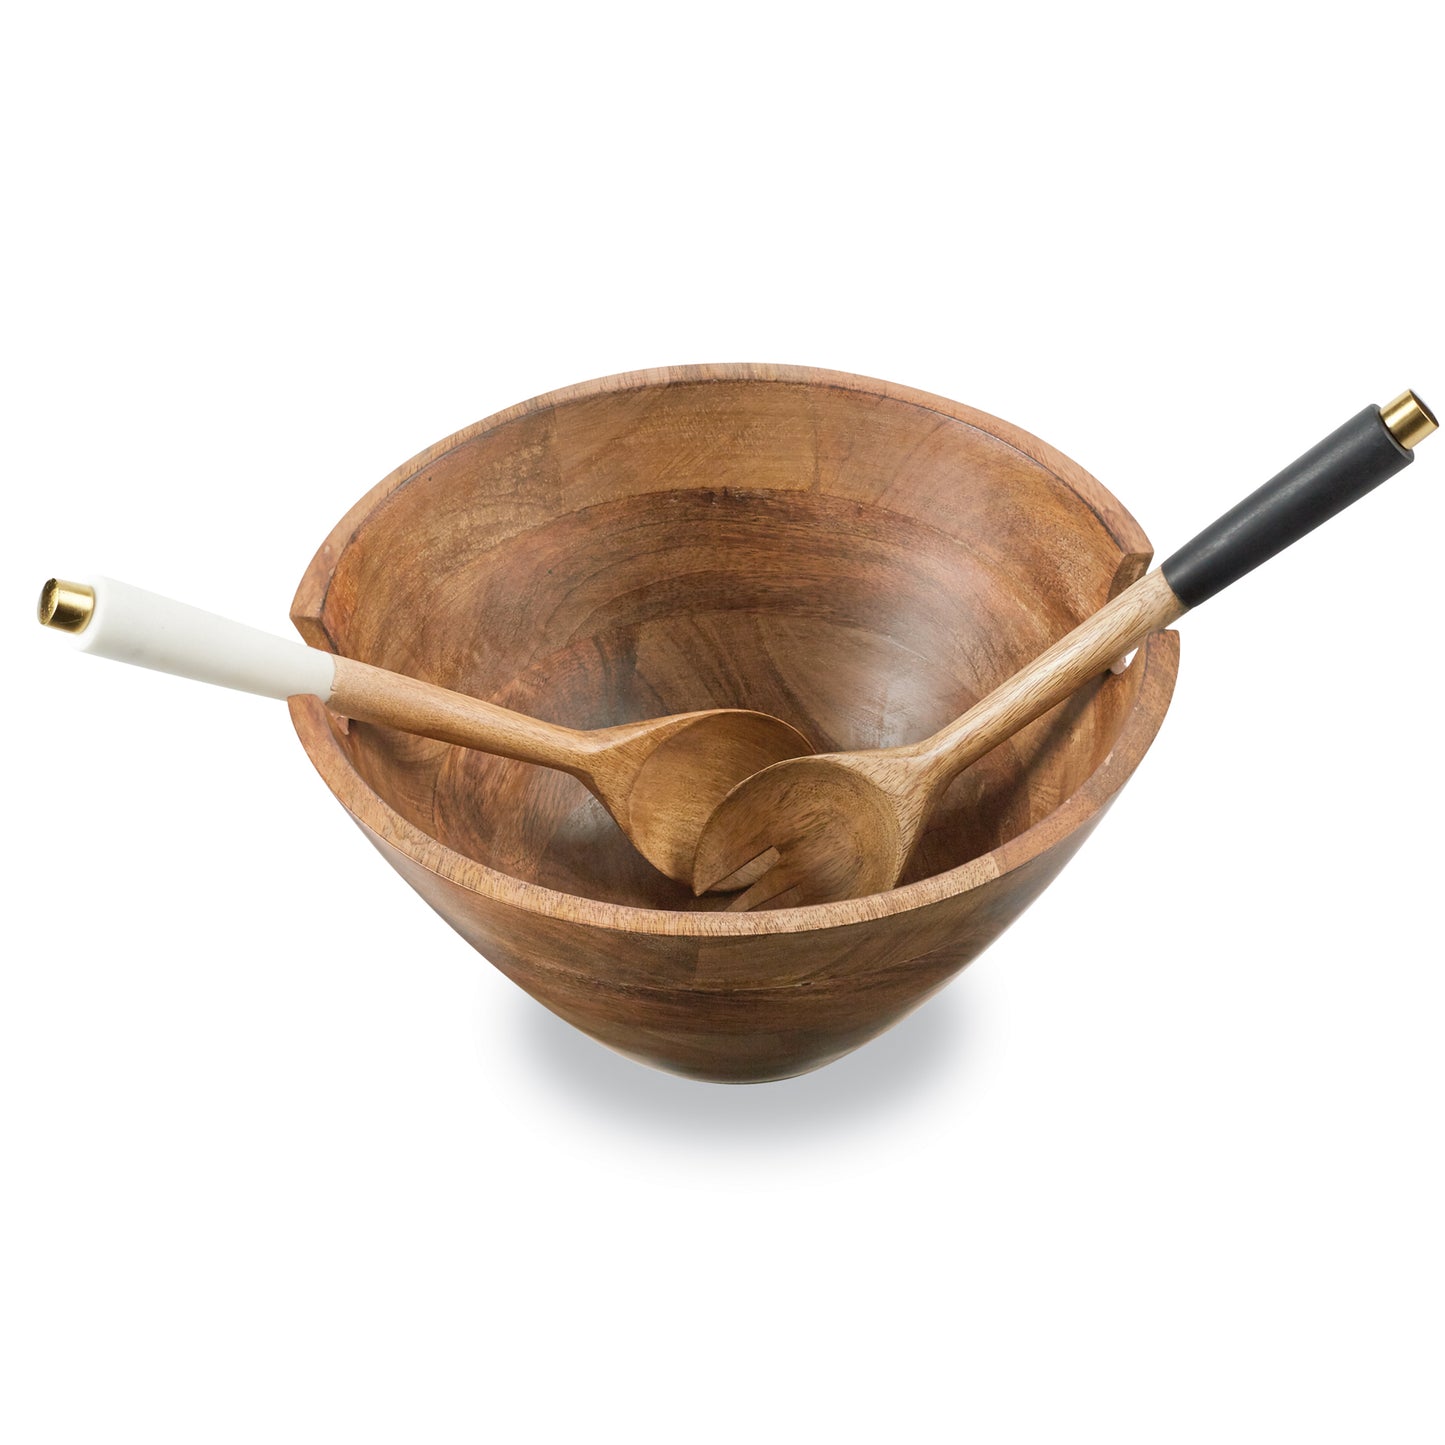 wooden serving bowl and utensil set on a white background